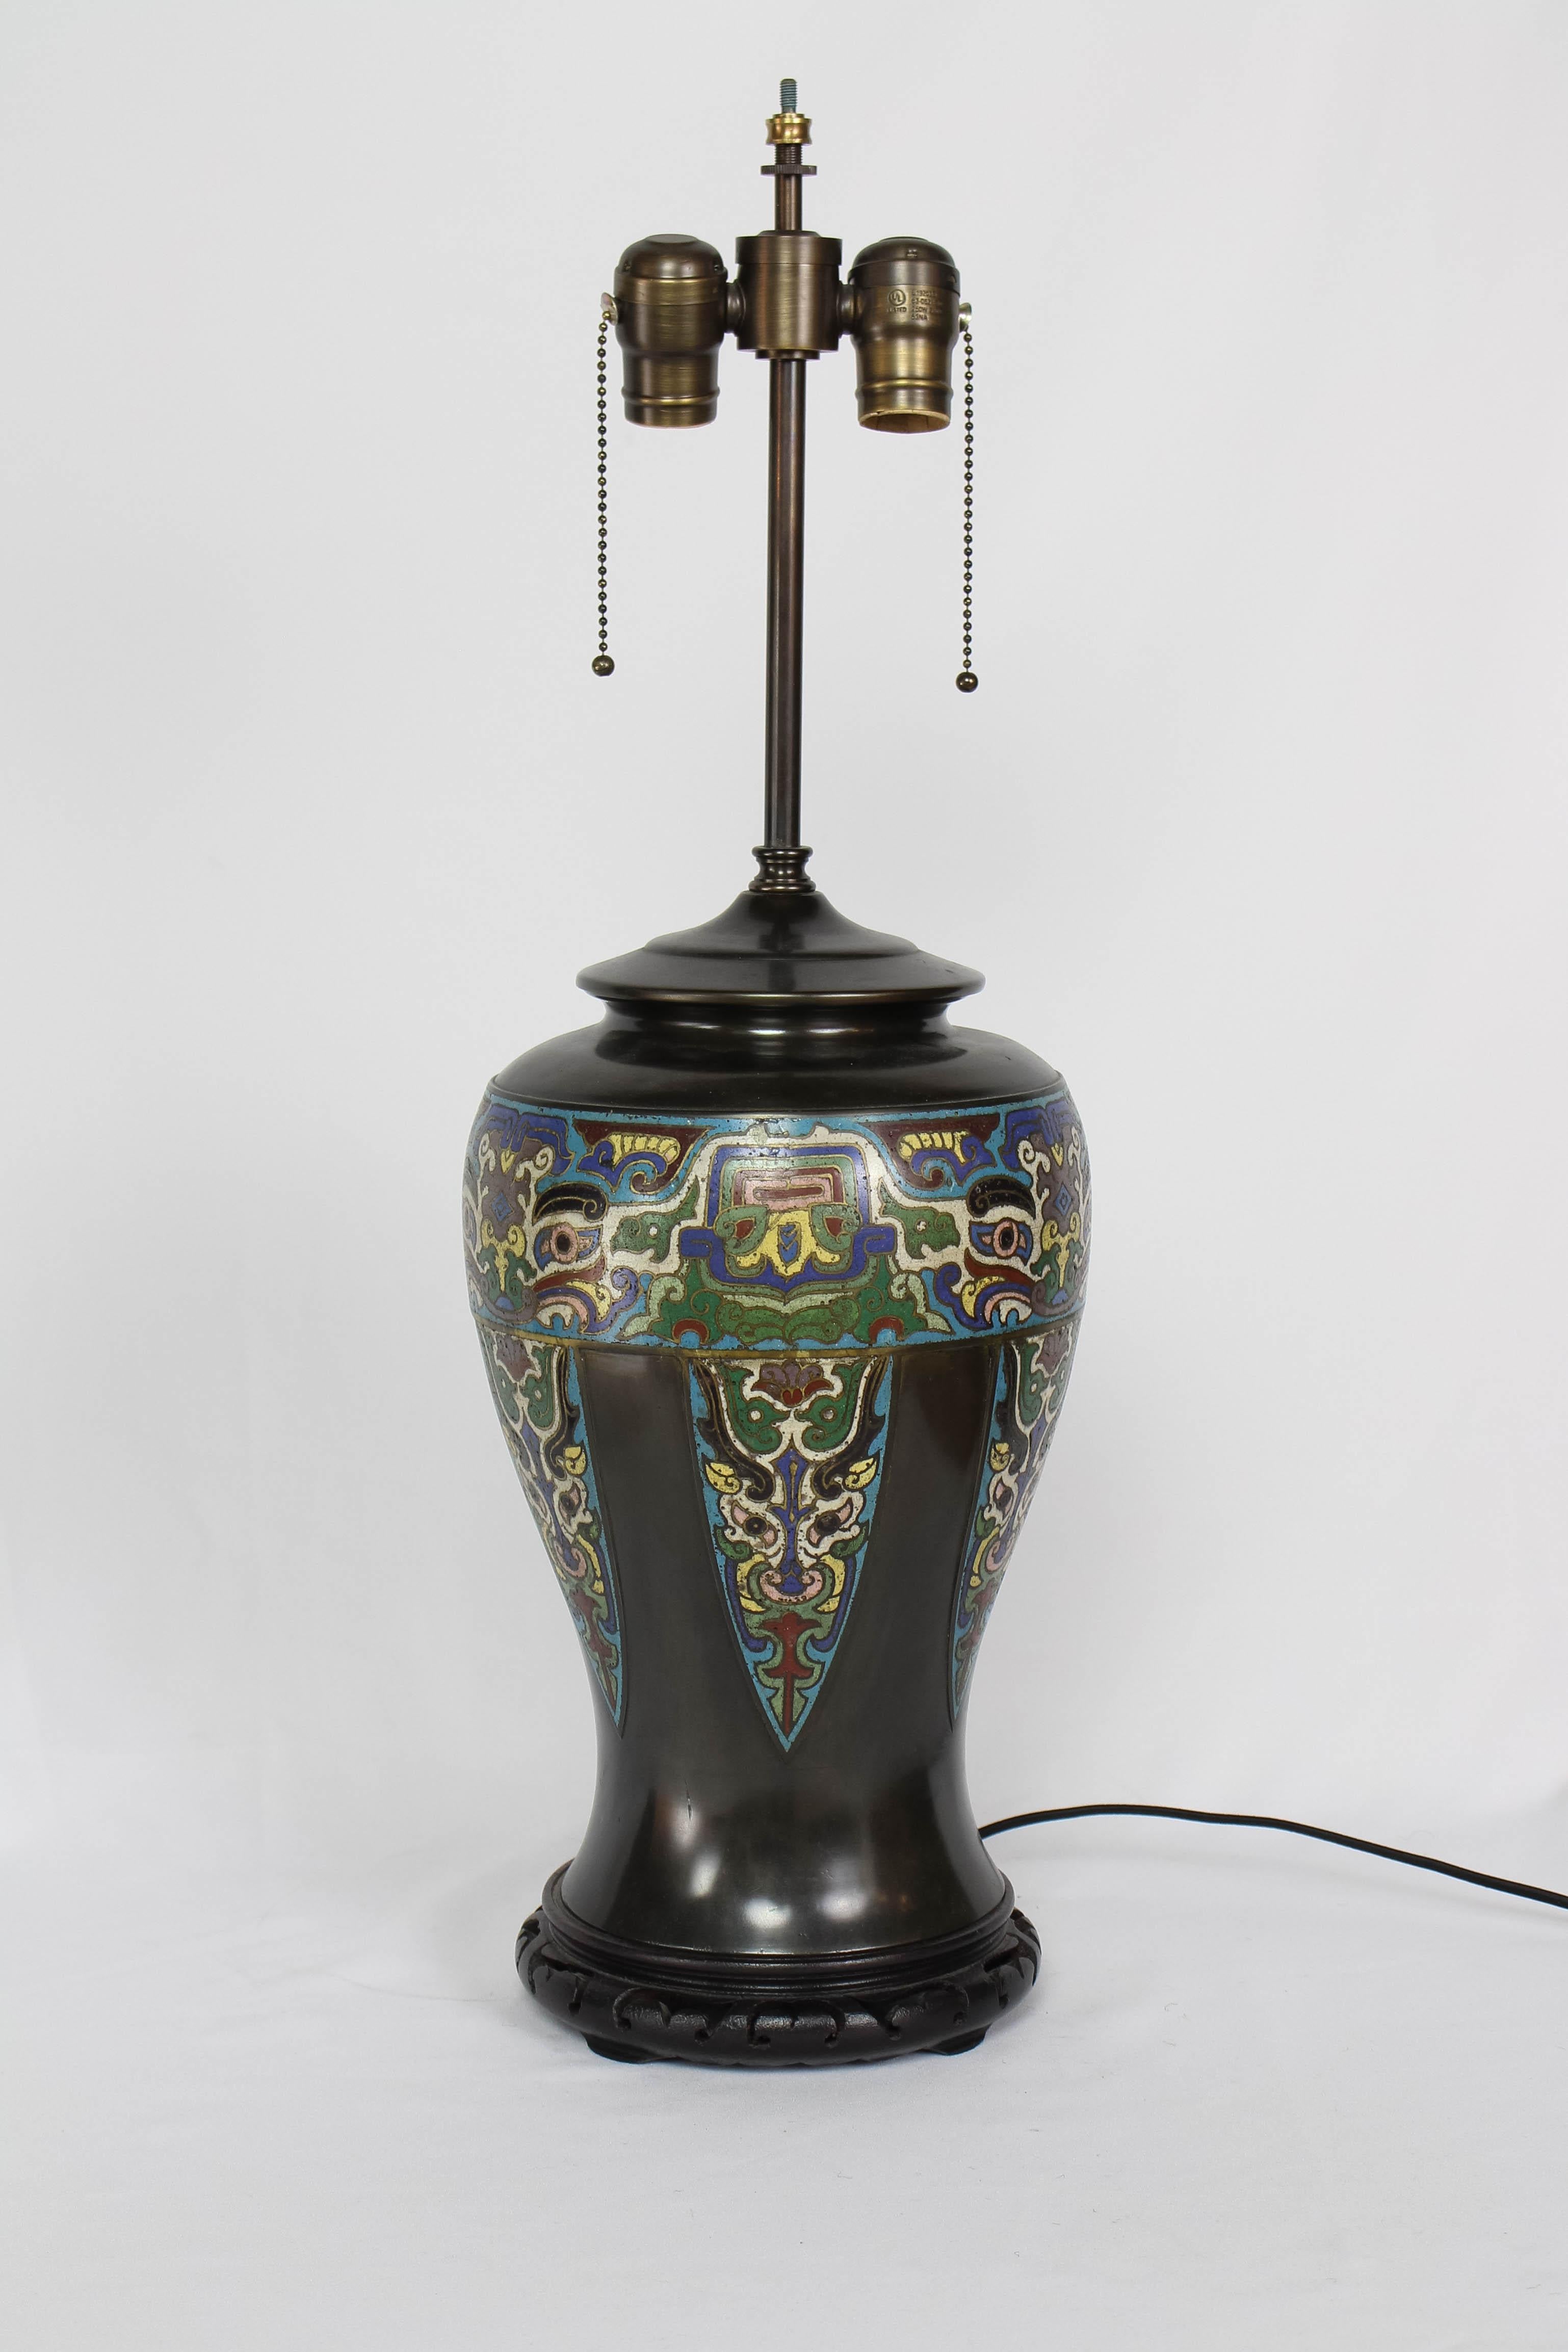 Asian Antique Champleve table lamp. Totem like design
Beautifully patinated bronze with Champleve in a band around the vase and with spears pointing down. The Champleve design in very good condition, and the design features distinctive eyes.